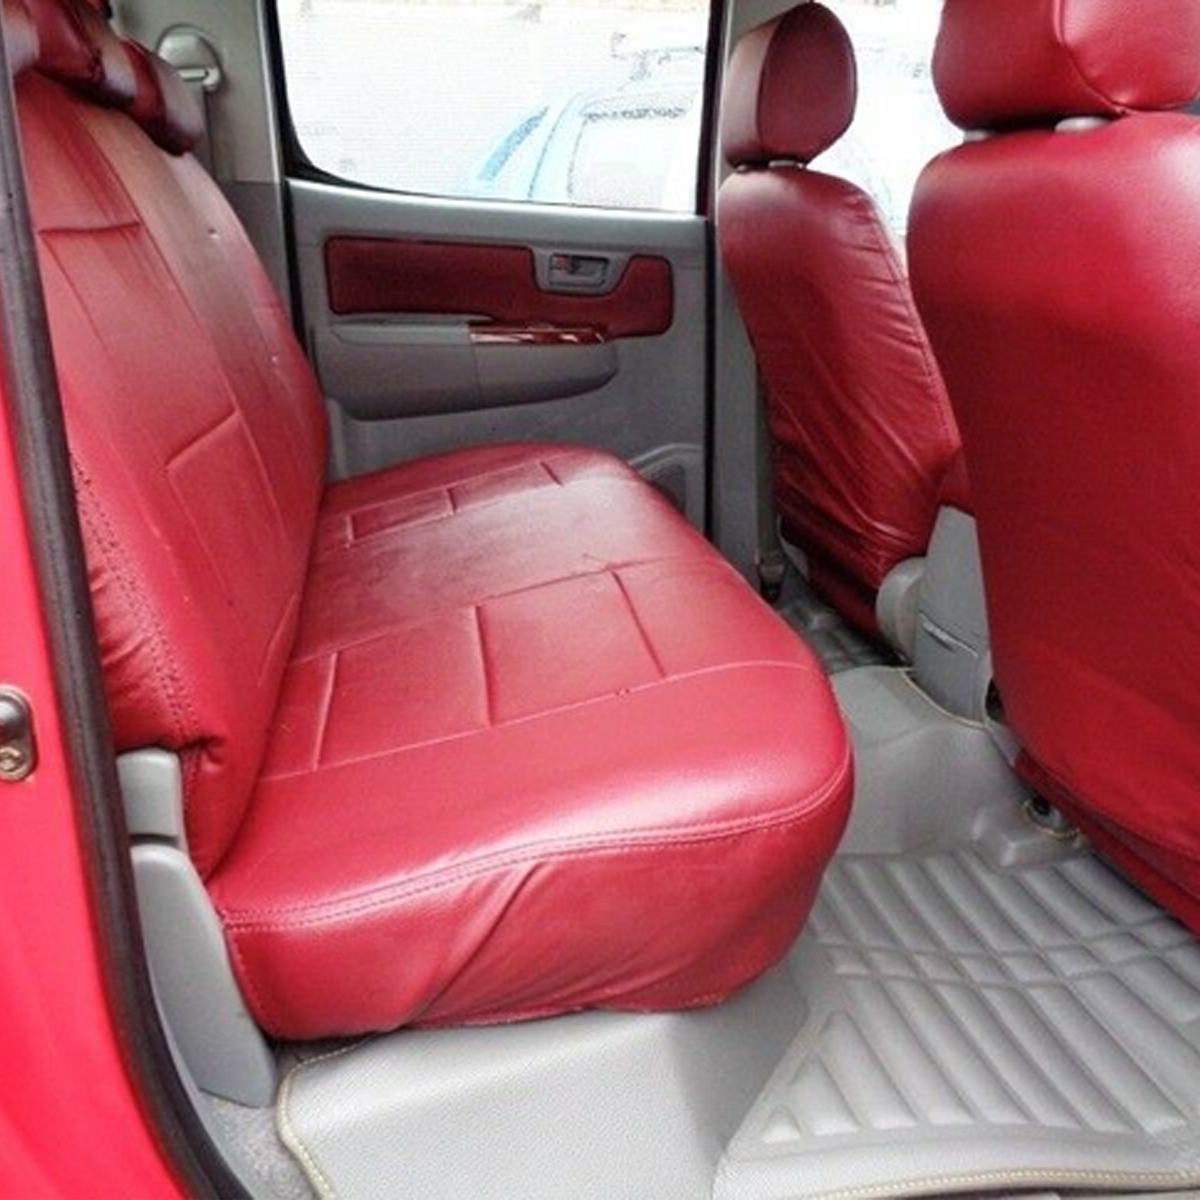 UNIVERSAL HEAVY DUTY LEATHER LOOK CAR SEAT COVERS SET SKIN FRIENDLY